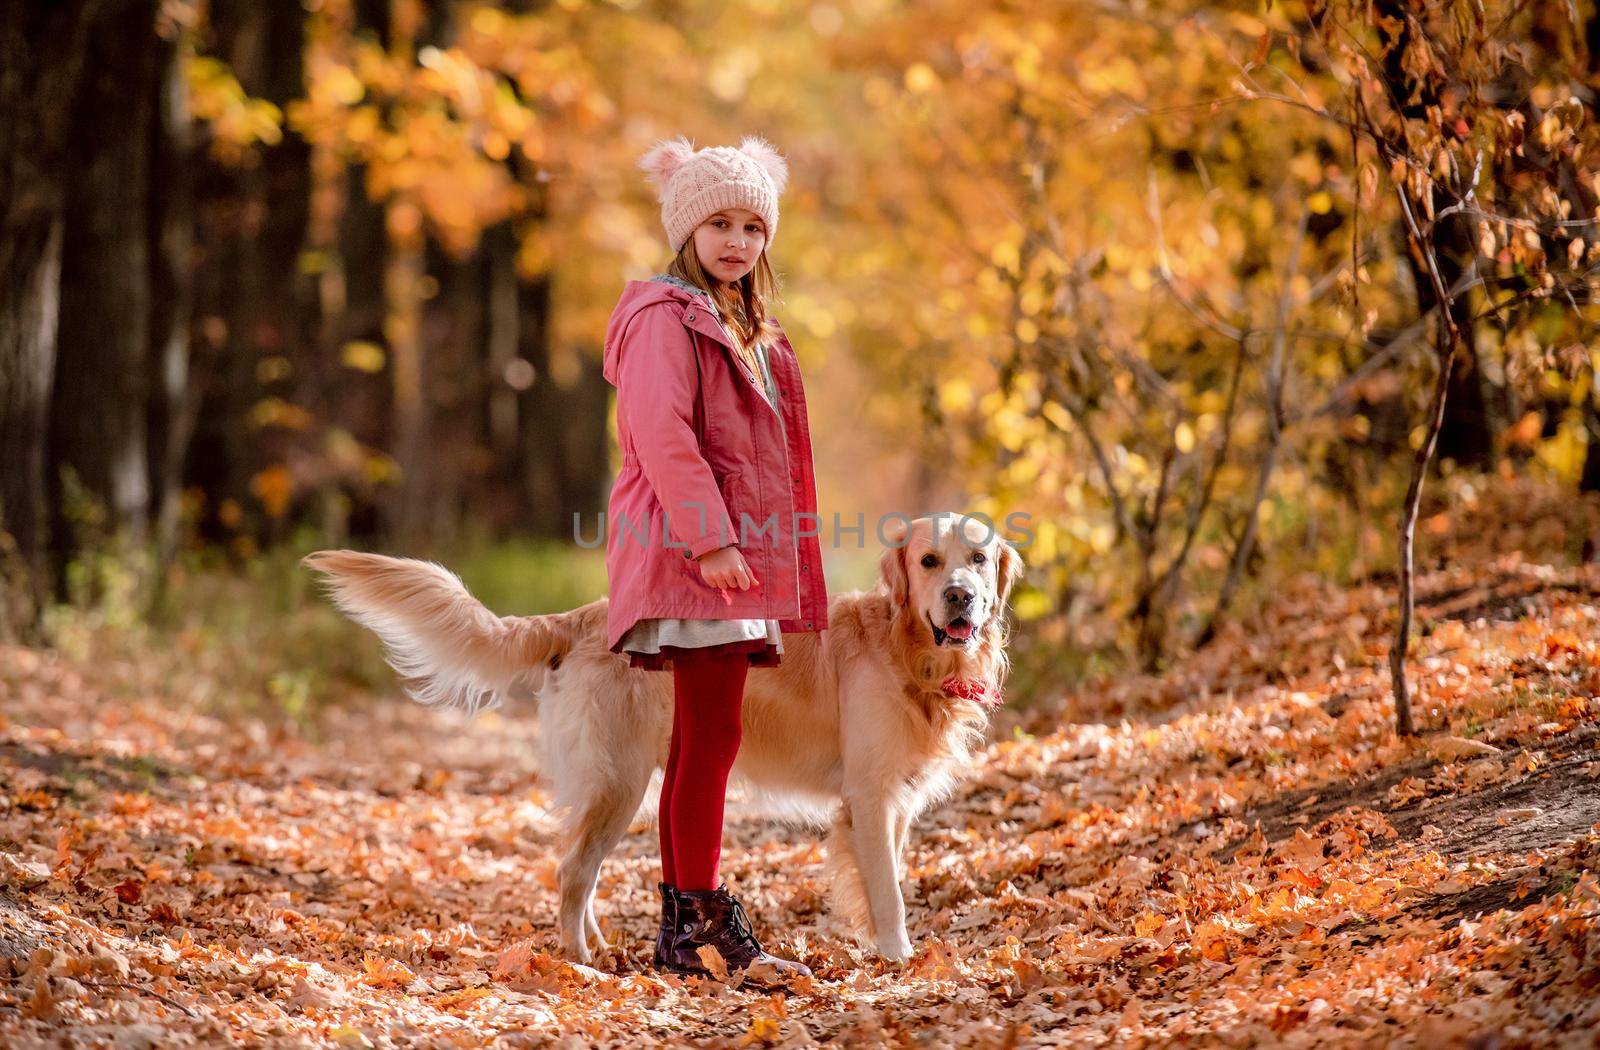 Cute girl kid with golden retriever dog looking at camera at autumn park. Beautiful portrait of child and pet outdoors at nature